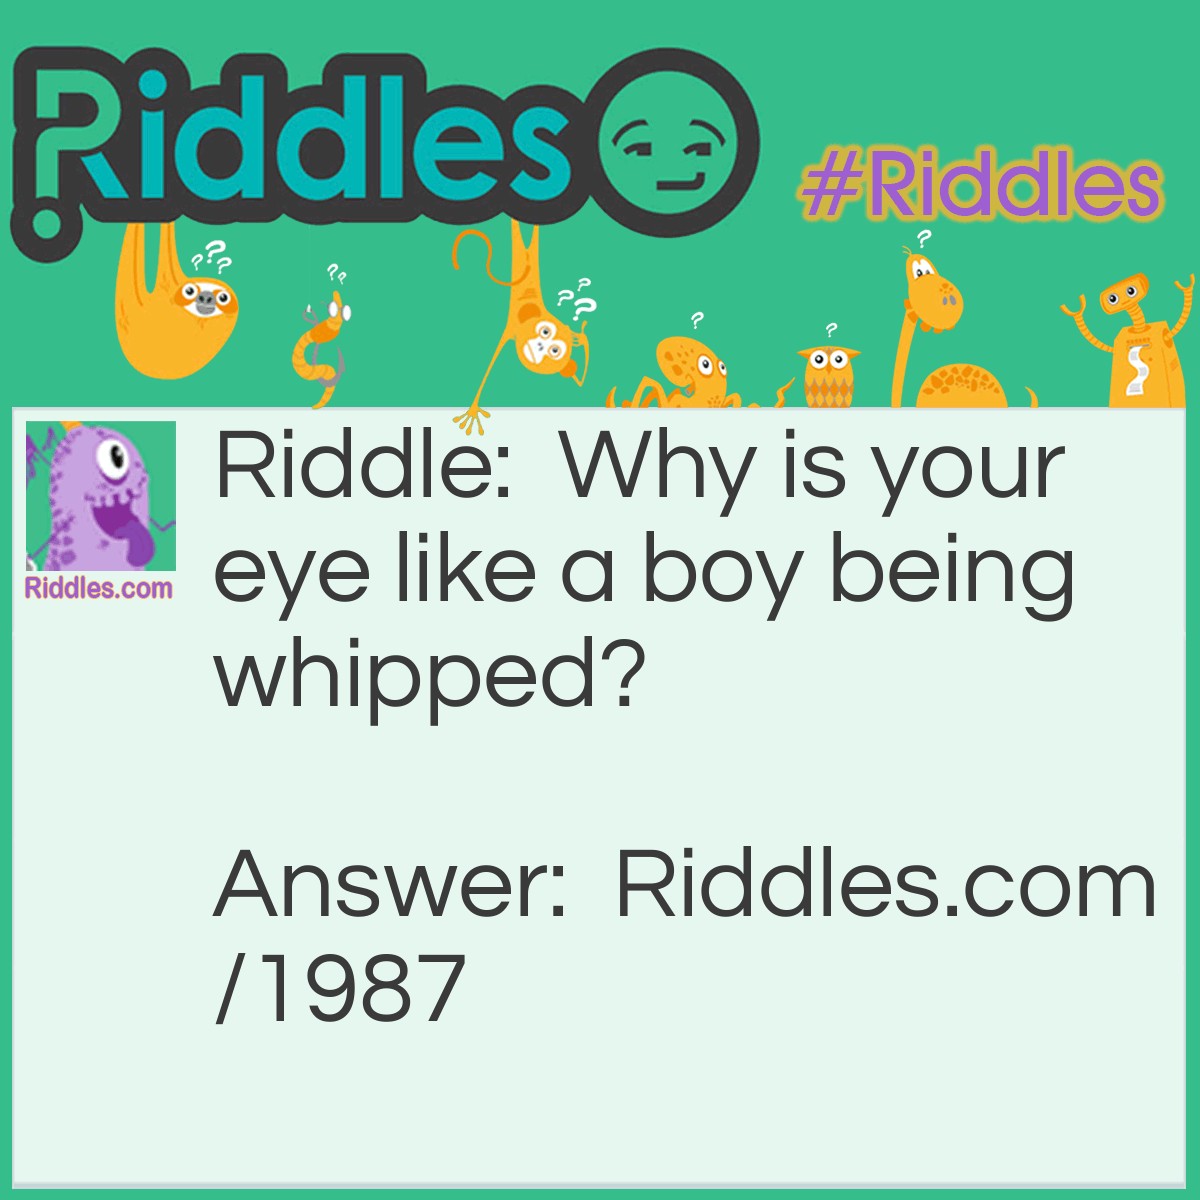 Riddle: Why is your eye like a boy being whipped? Answer: It is under the lash.